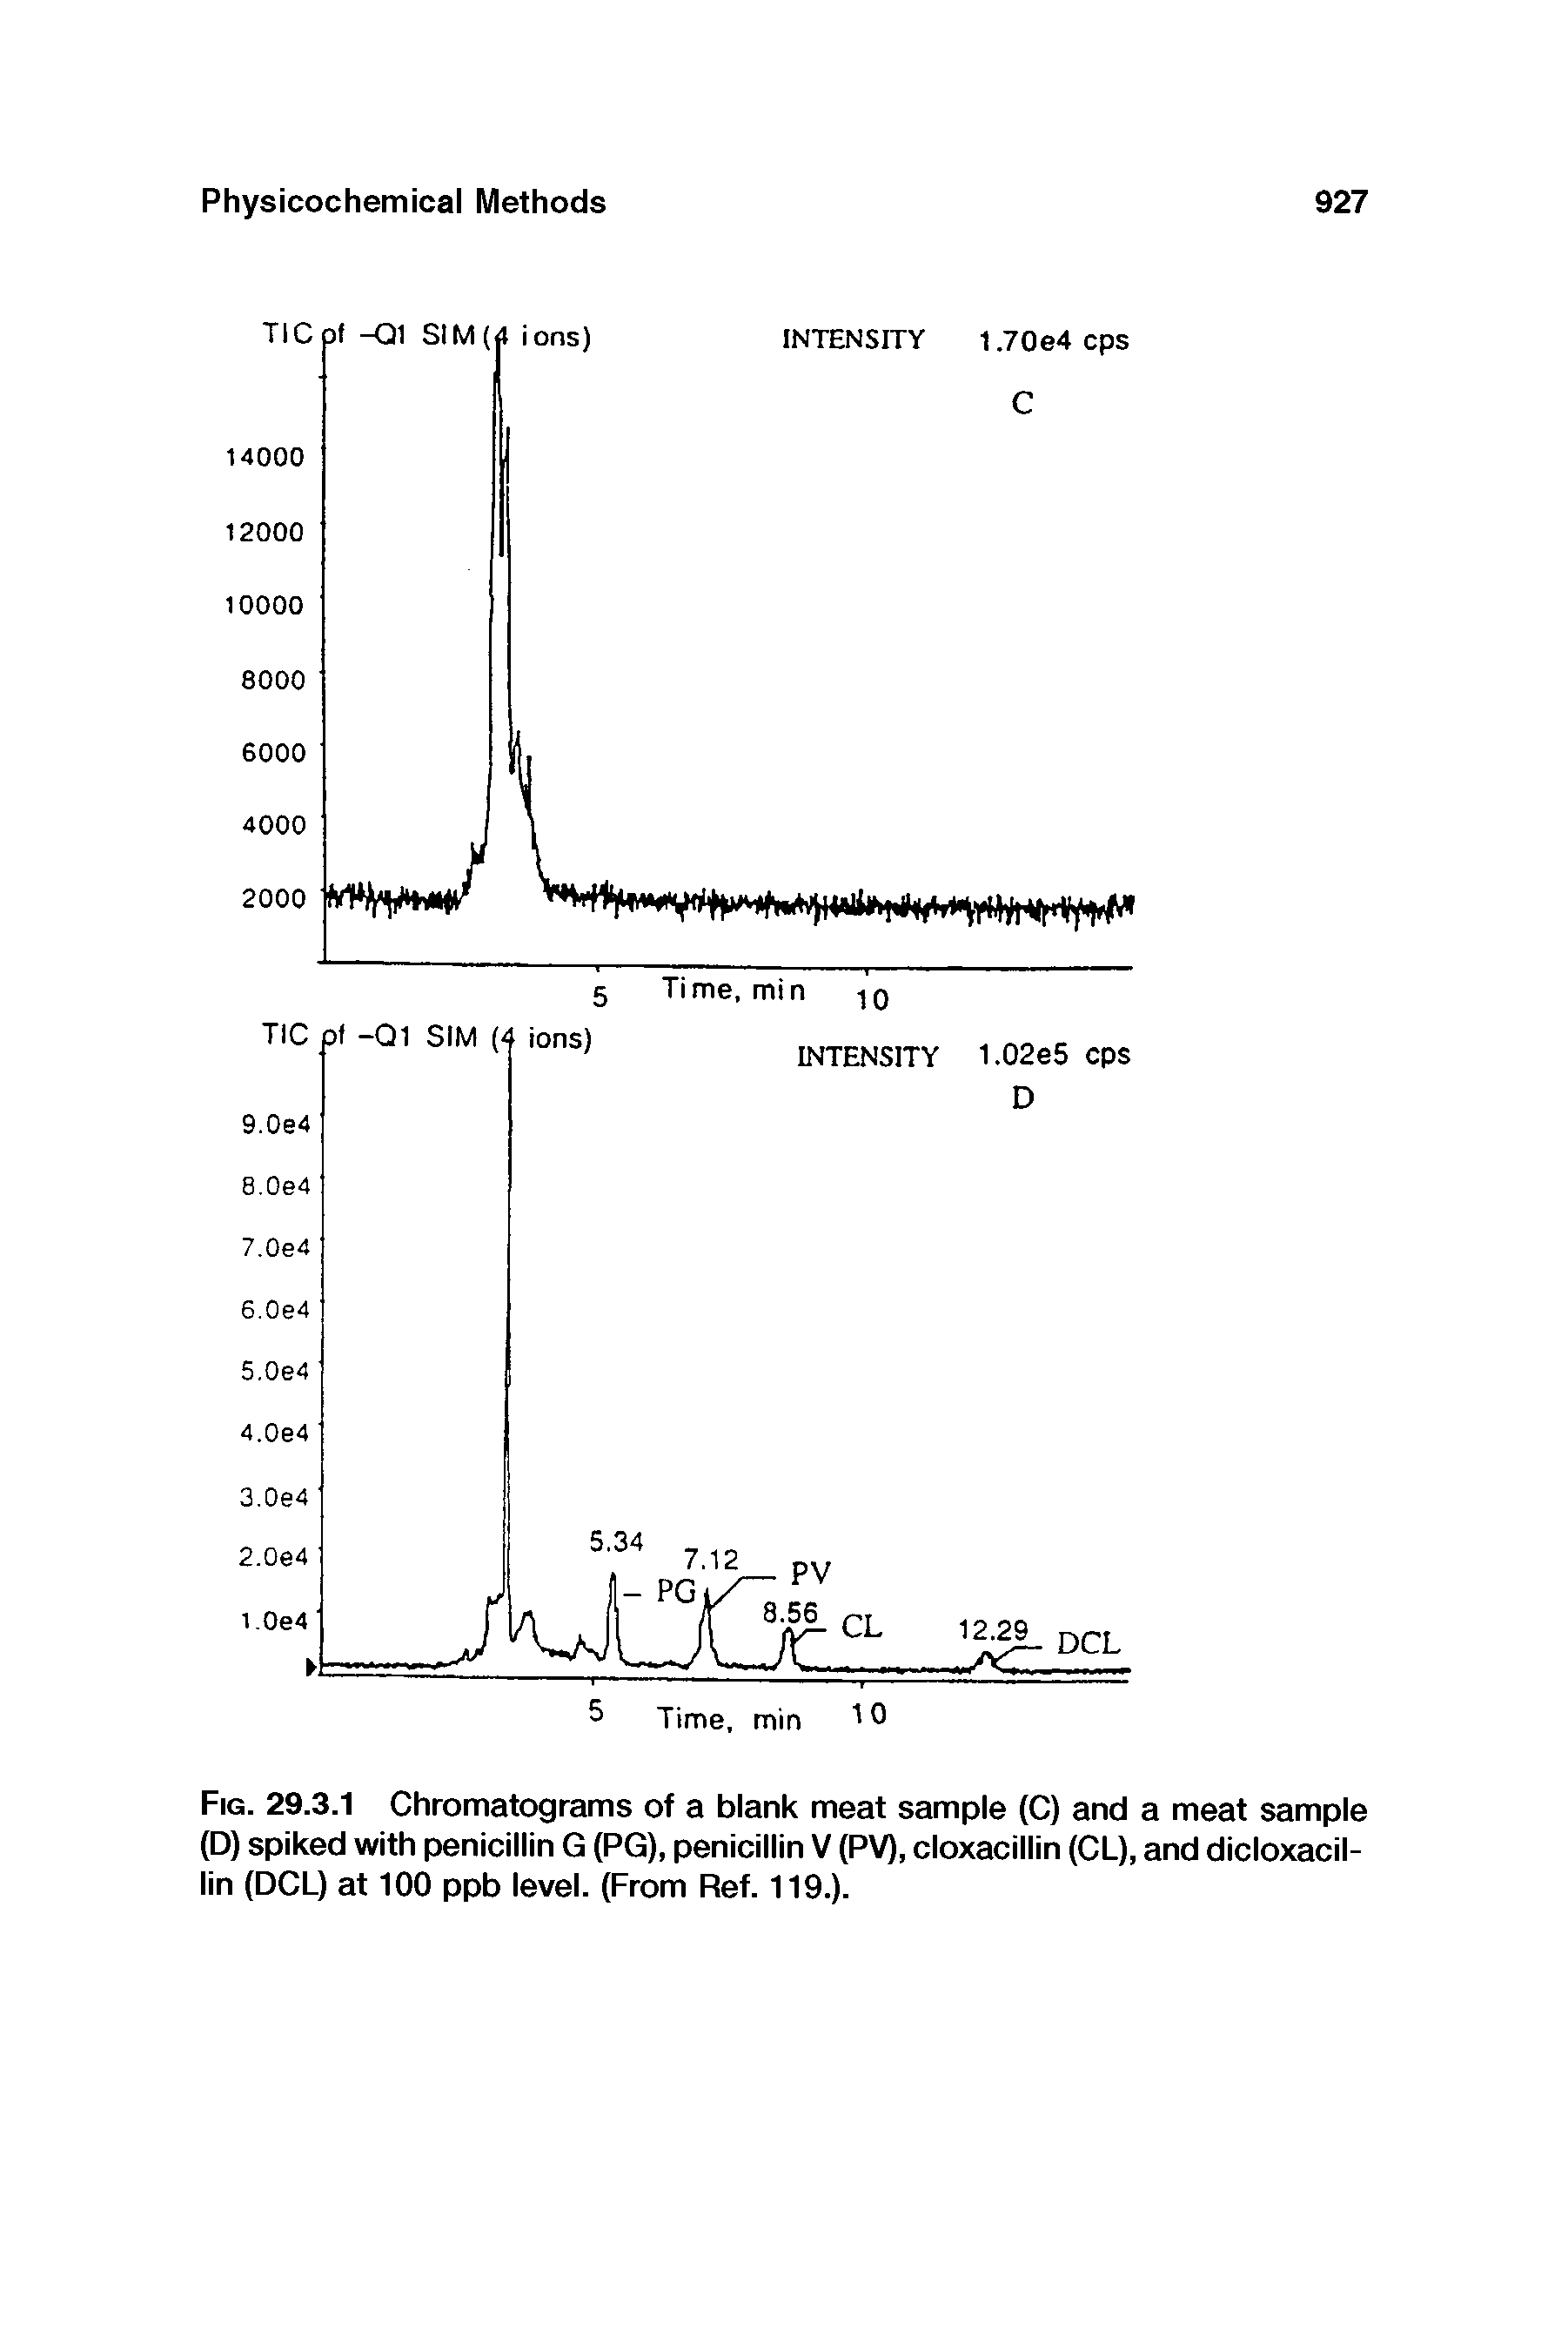 Fig. 29.3.1 Chromatograms of a blank meat sample (C) and a meat sample (D) spiked with penicillin G (PG), penicillin V (PV), cloxacillin (CL), and dicloxacil-lin (DCL) at 100 ppb level. (From Ref. 119.).